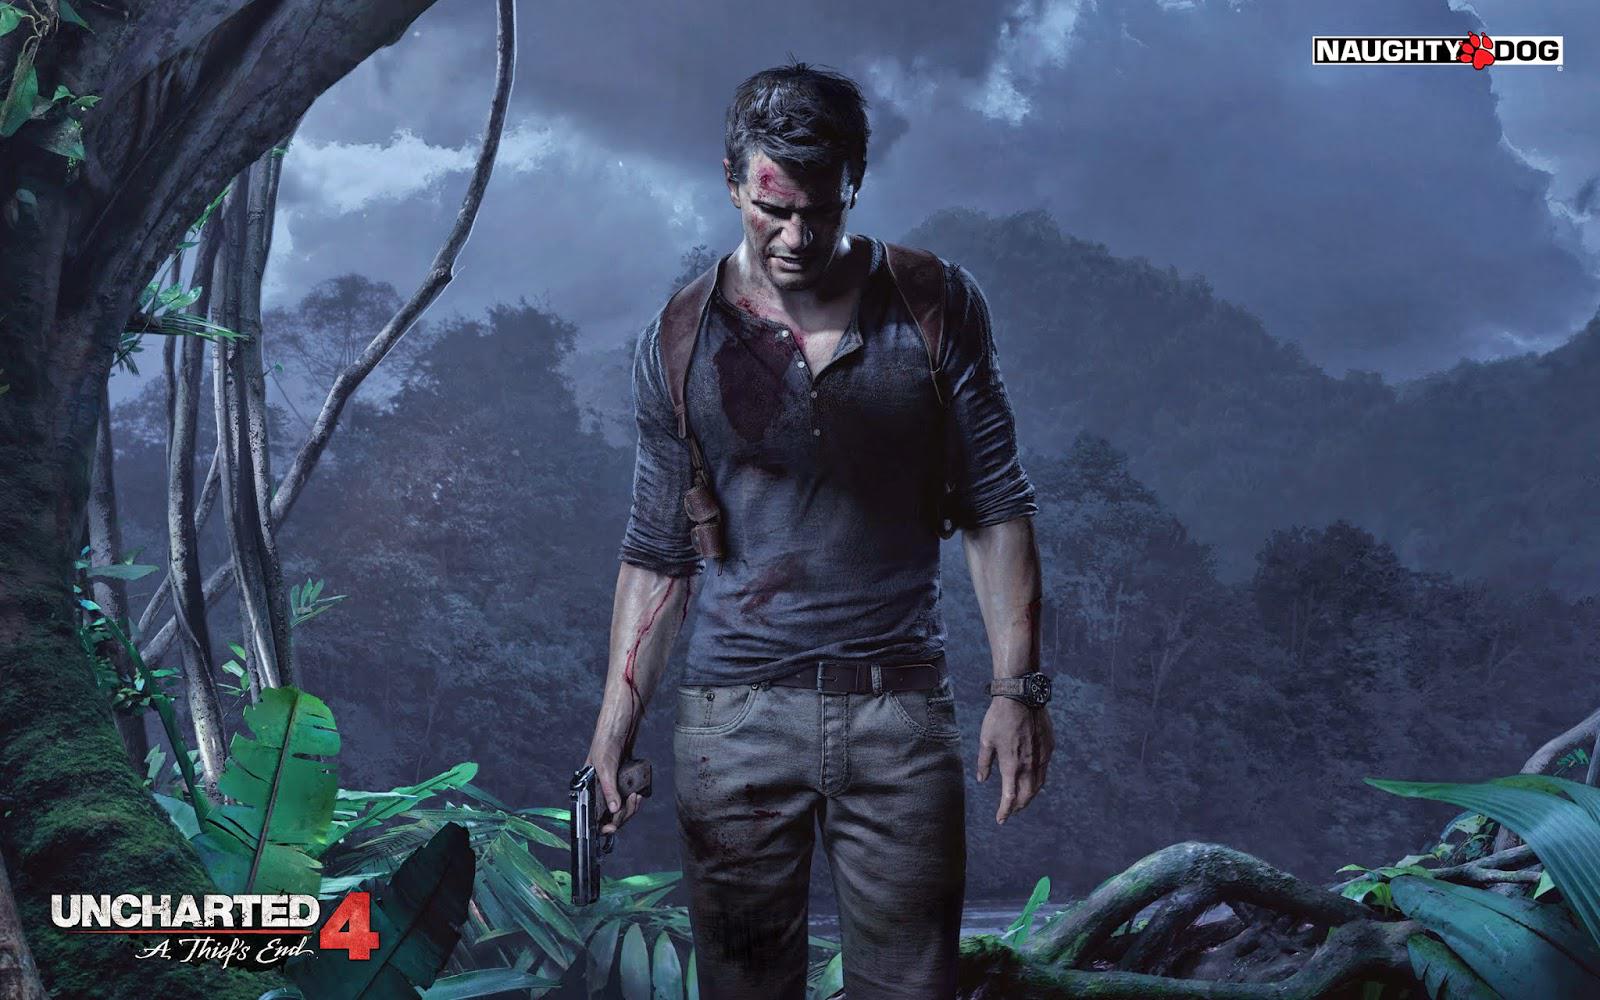 uncharted 4 free ps4